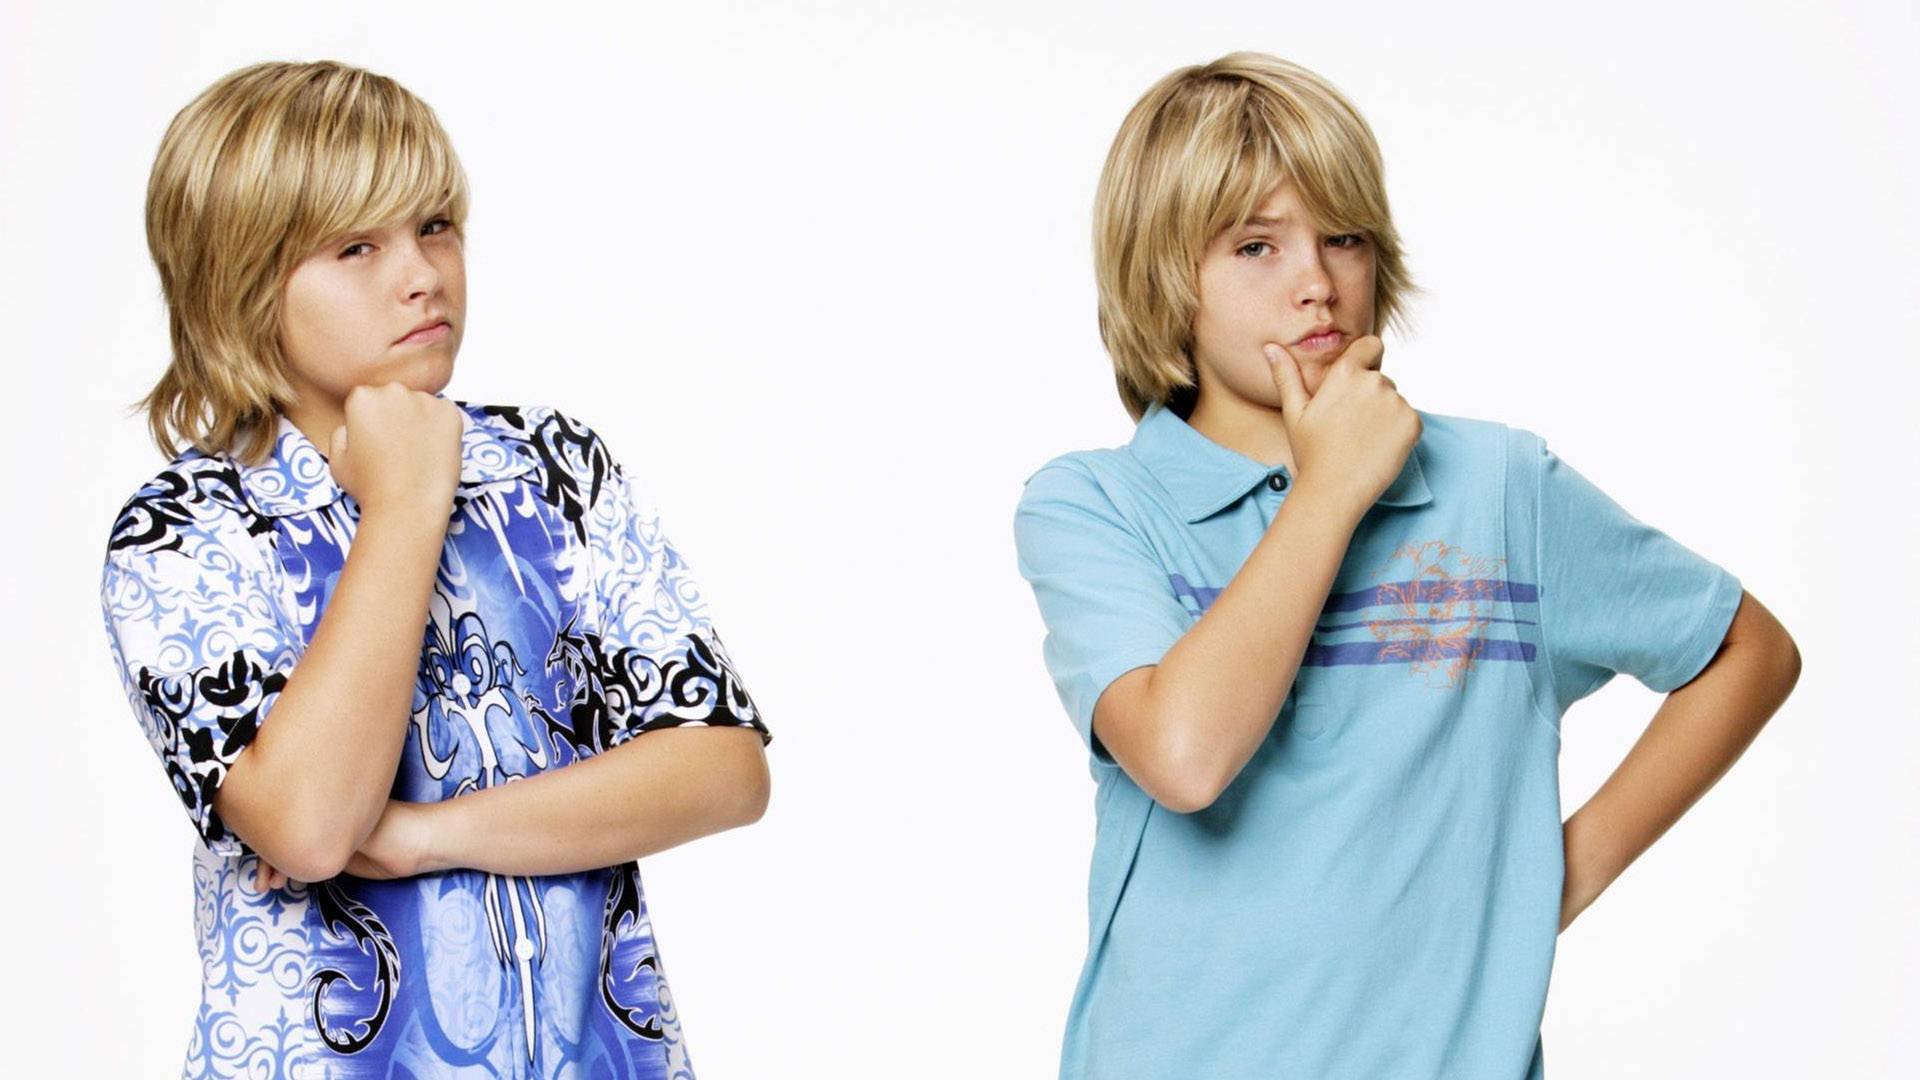 suite life of zack and cody